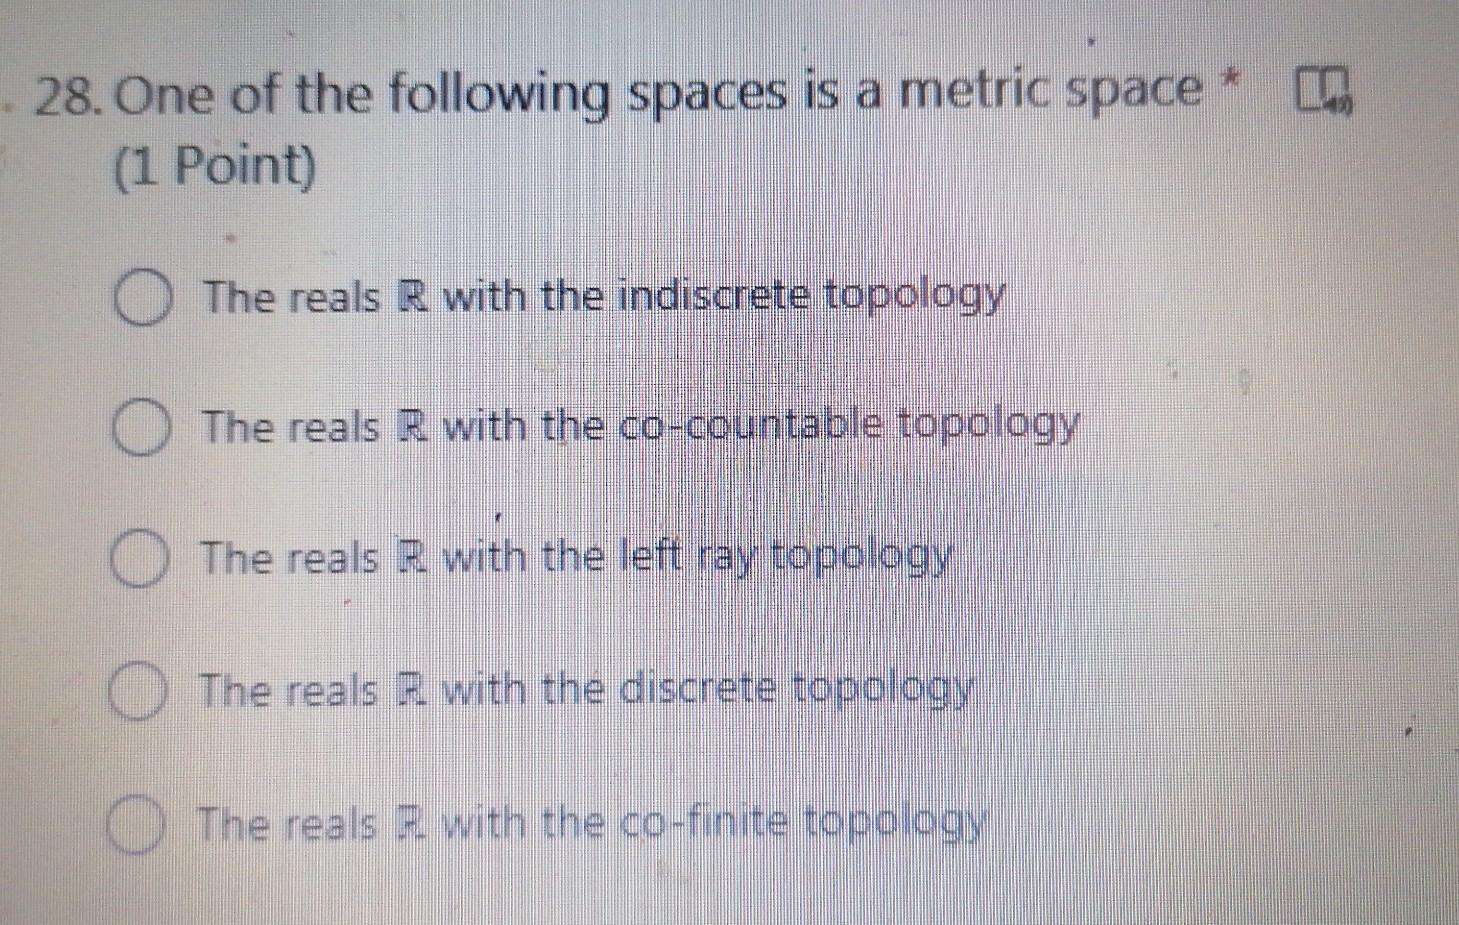 28 One Of The Following Spaces Is A Metric Space 1 Point The Reals R With The Indiscrete Topology The Reals R With Th 1